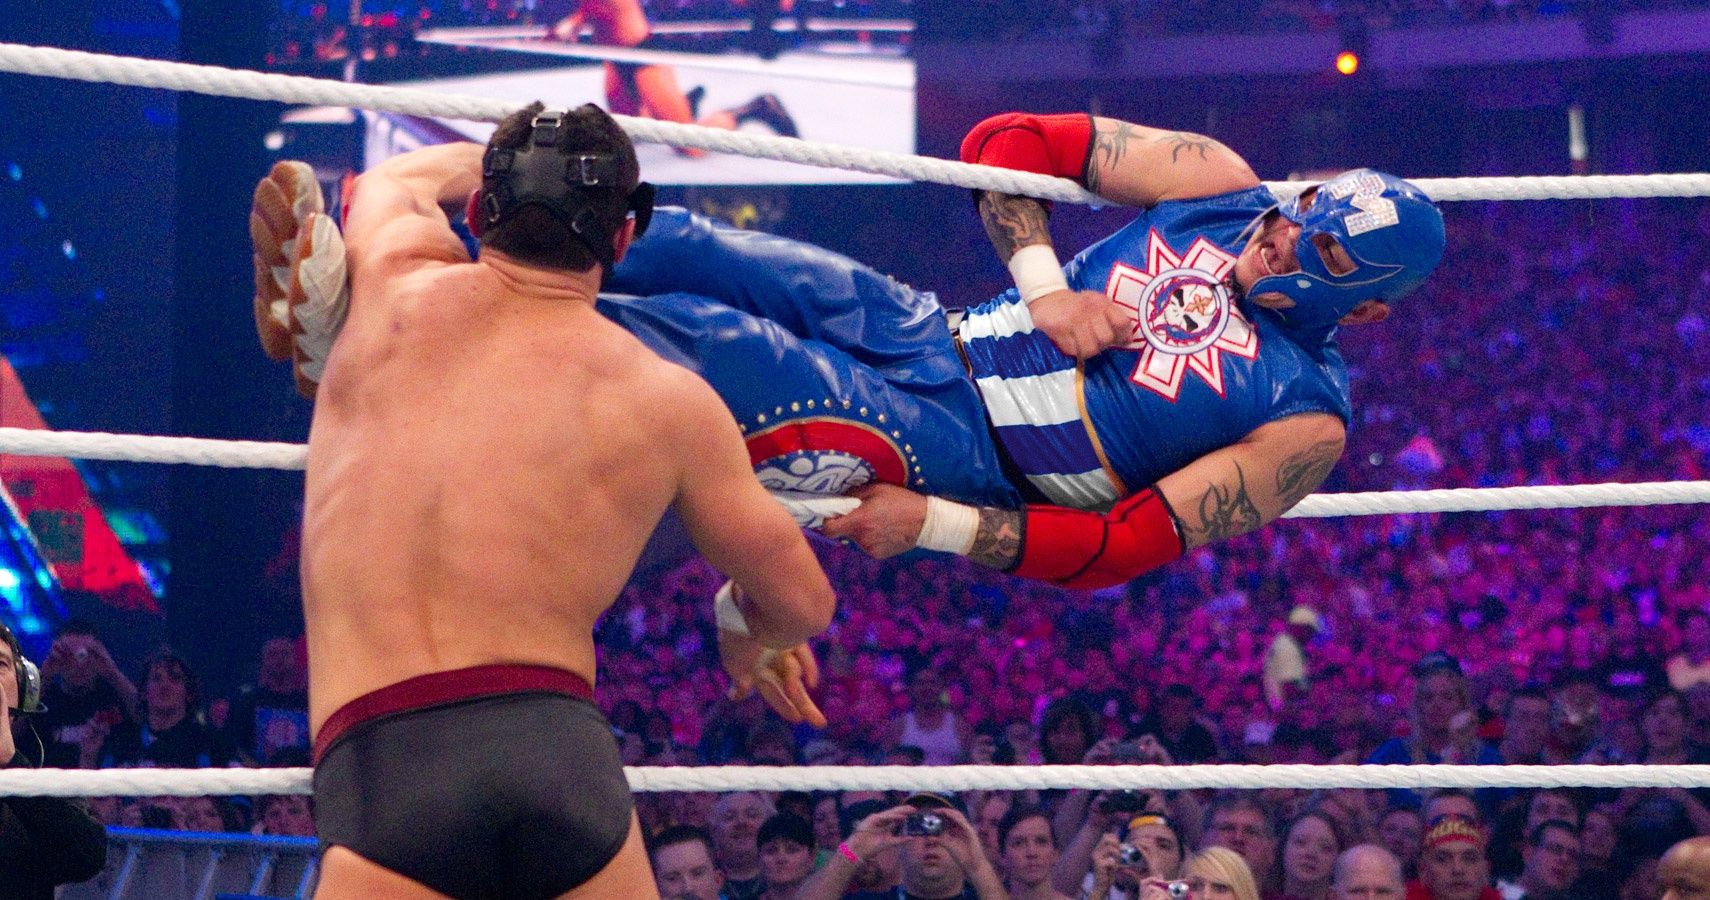 Ranking Rey Mysterio's WrestleMania Outfits From Worst To Best